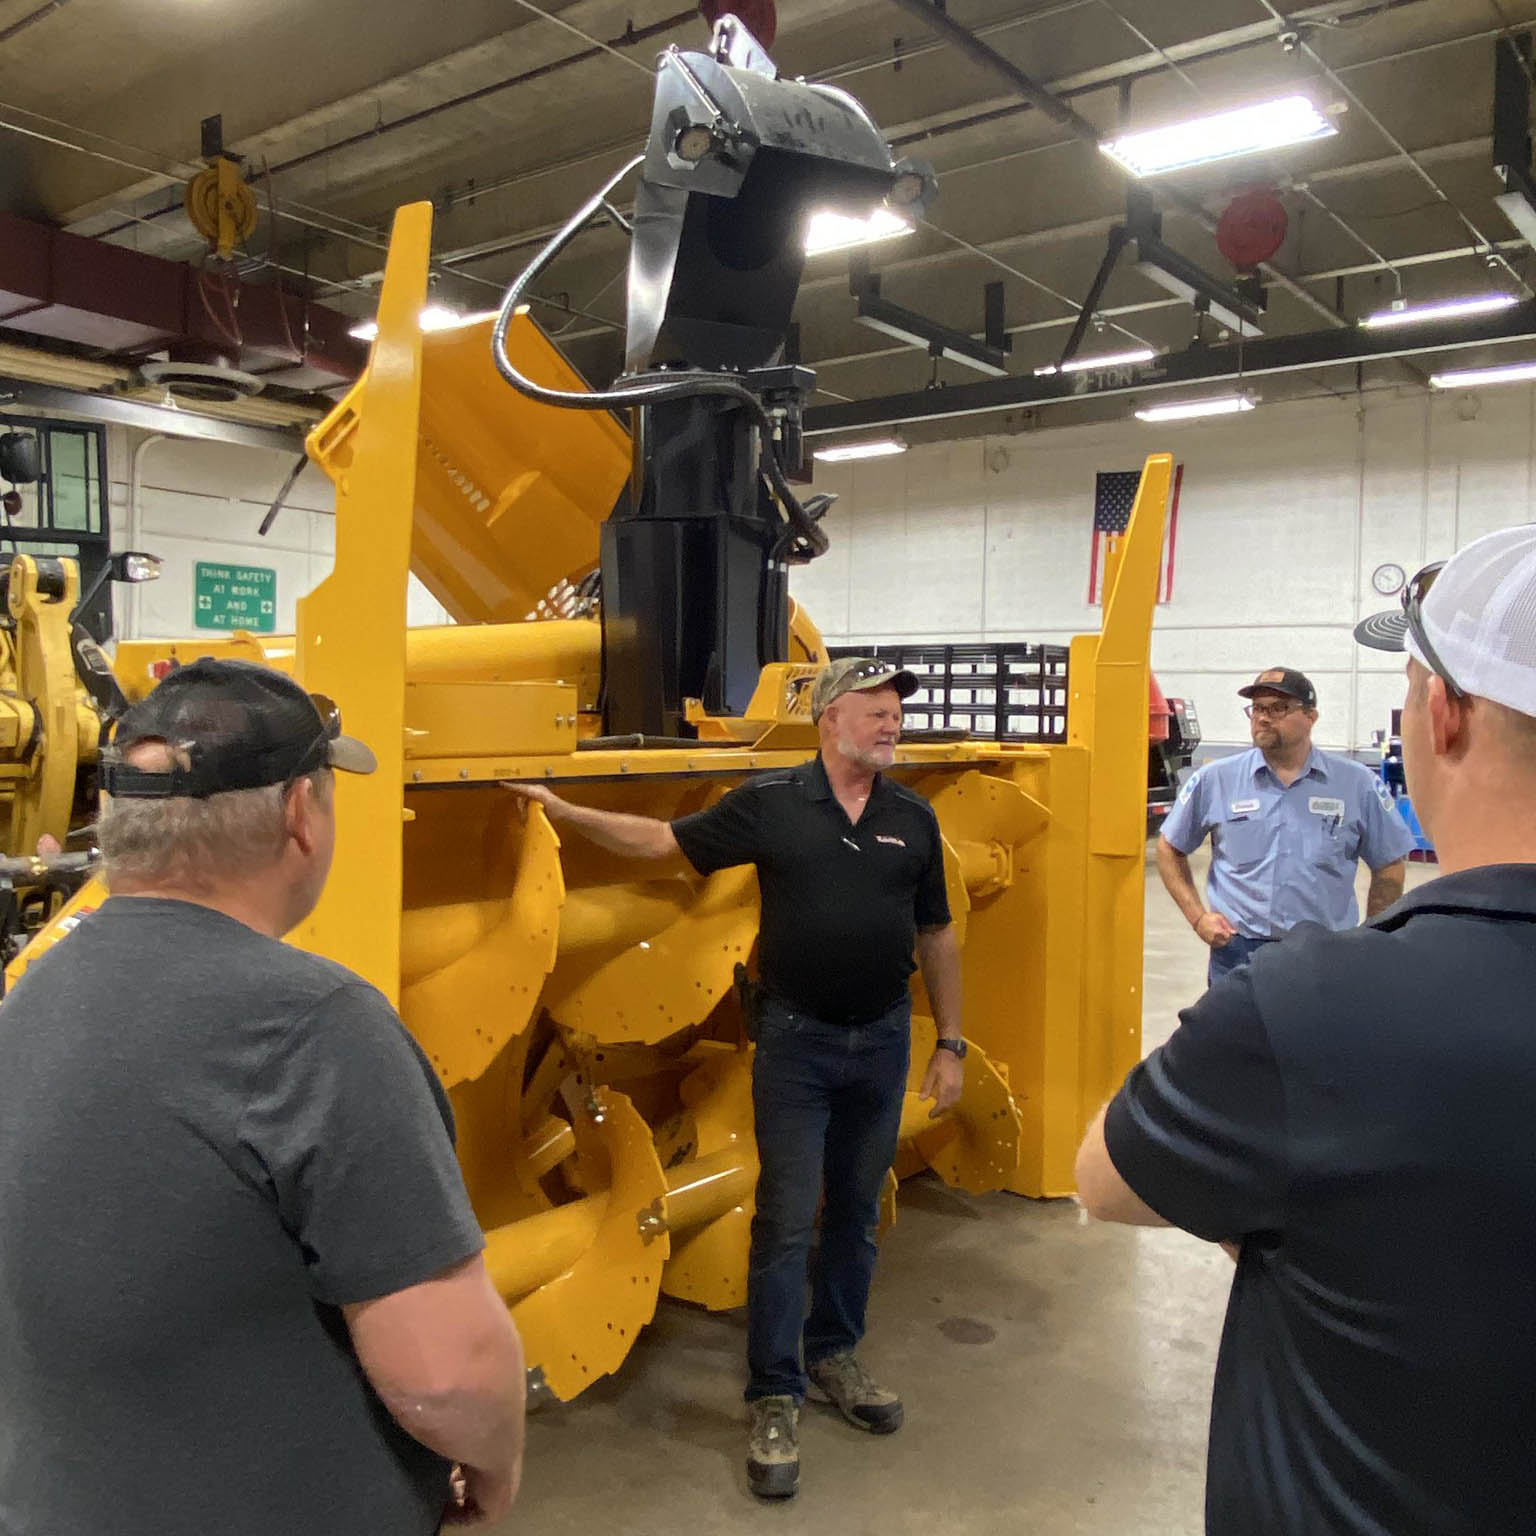 A group of people are gathered around a heavy-duty snowblower and receiving training on how to use the snowblower.